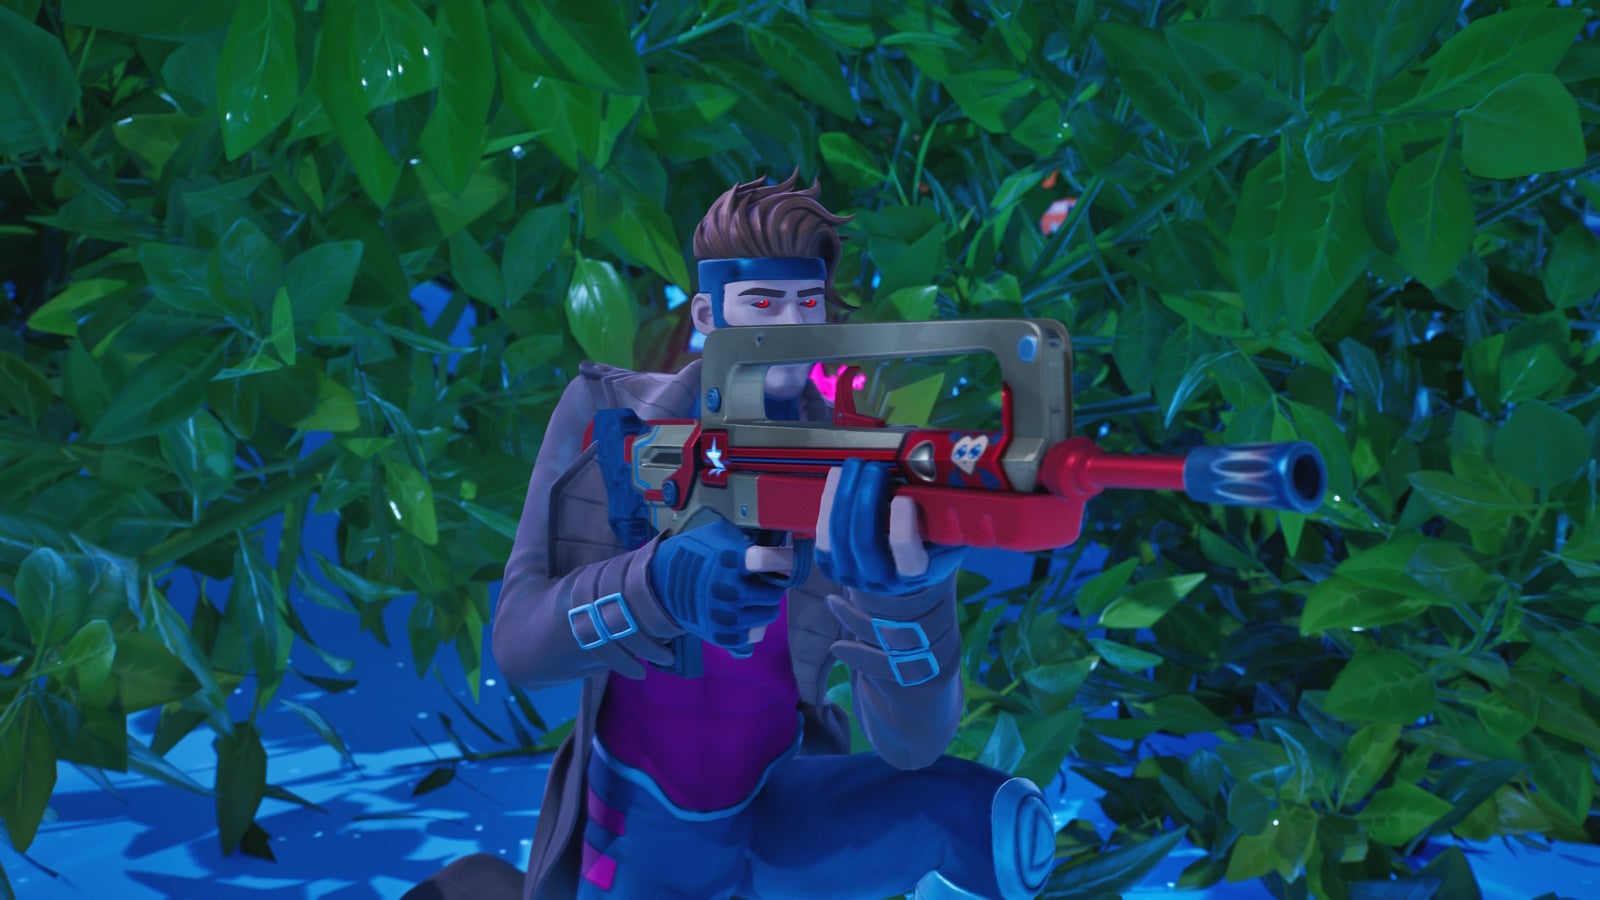 How to hide in bushes that you threw down in Fortnite Eurogamer